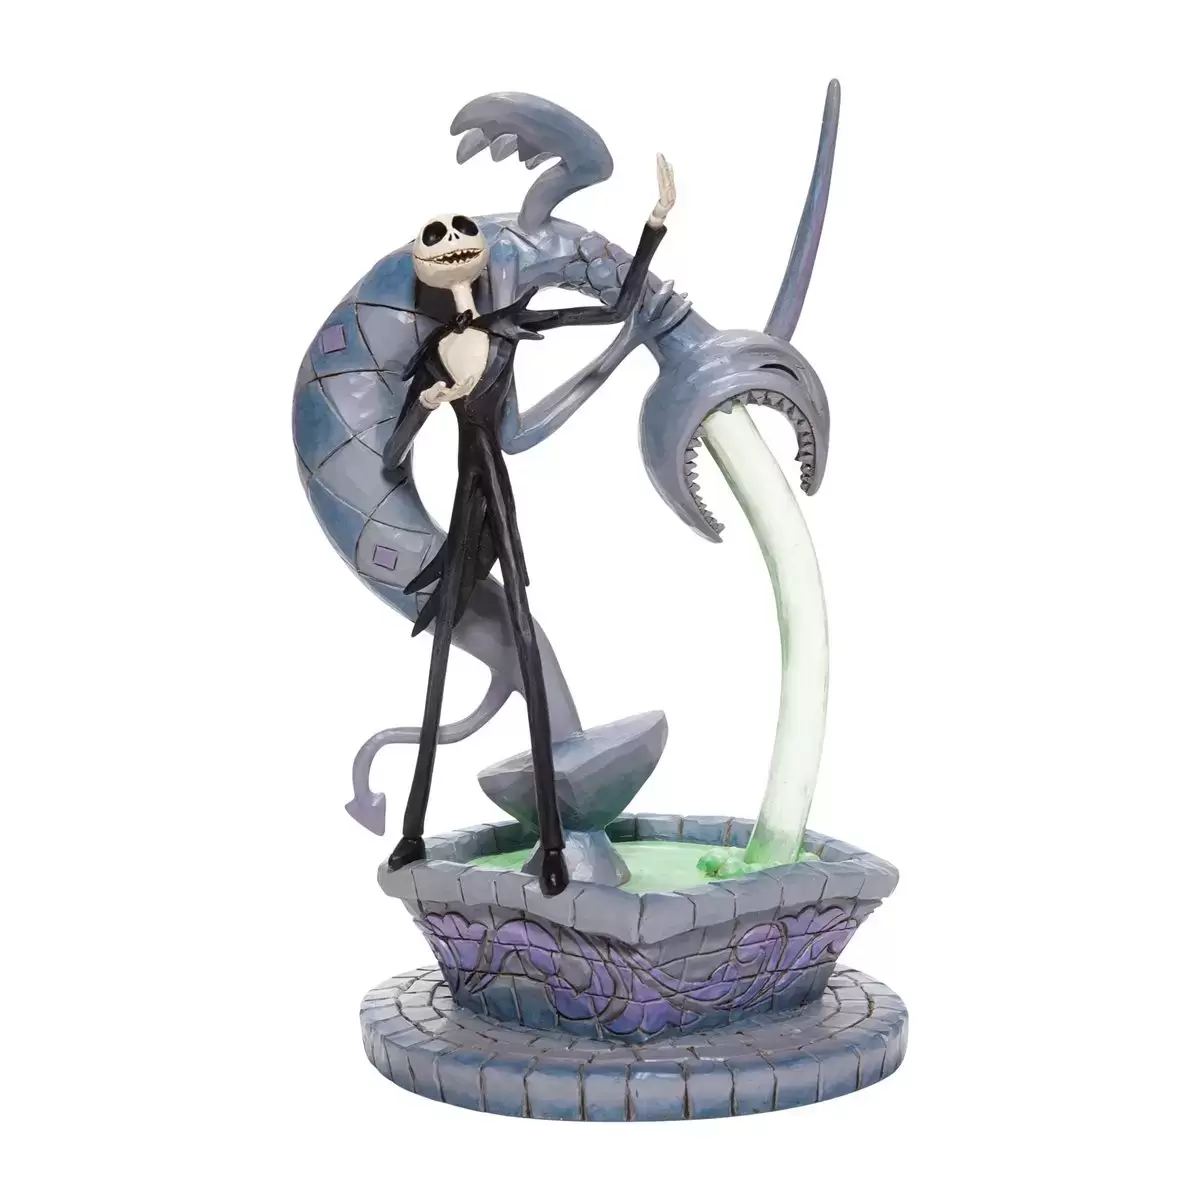 Disney Traditions by Jim Shore - Jack Skellington on Fountain